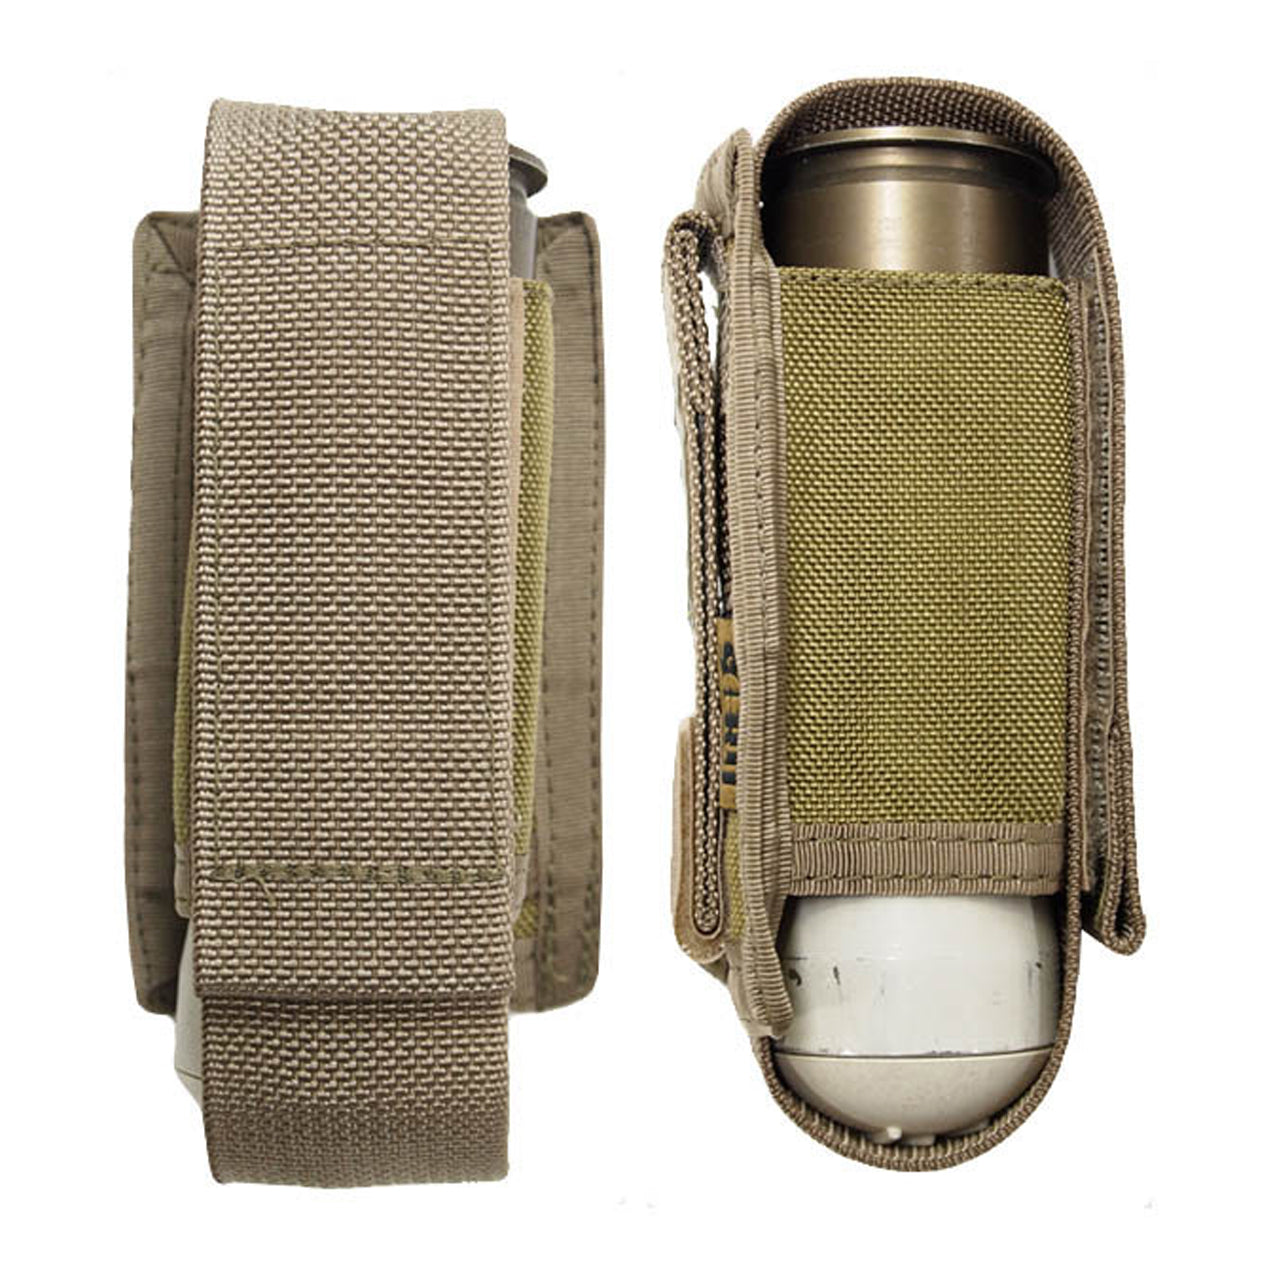 Holds a single 40mm Illumination round in a protective nylon sleeve. The round is held in via a Velcro flap that also acts as a "self serve" pull tab.   'Horizontal' refers to the way the the pouch is mounted - sideways with the round seated vertically.   Approved for use my Australian Defence Force   NSN 8465-66-155-9146  www.moralepatches.com.au